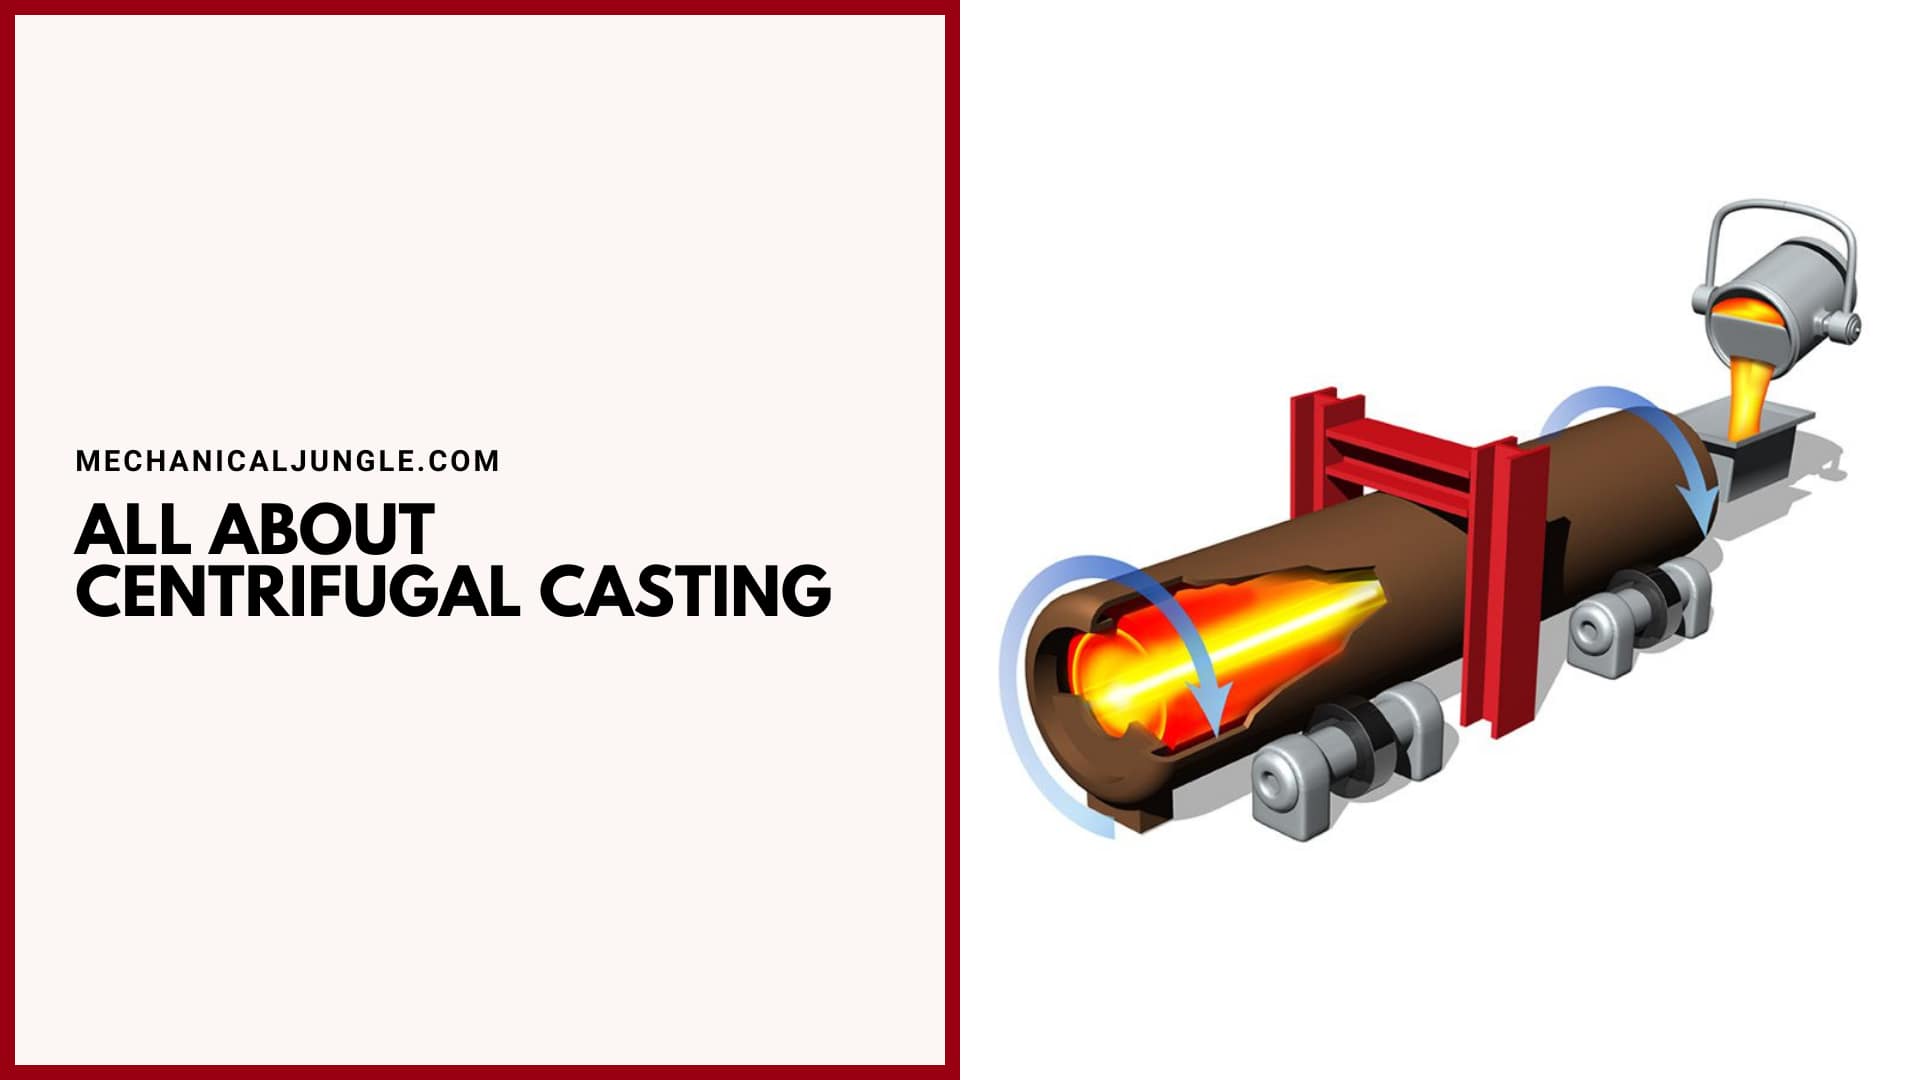 All About Centrifugal Casting